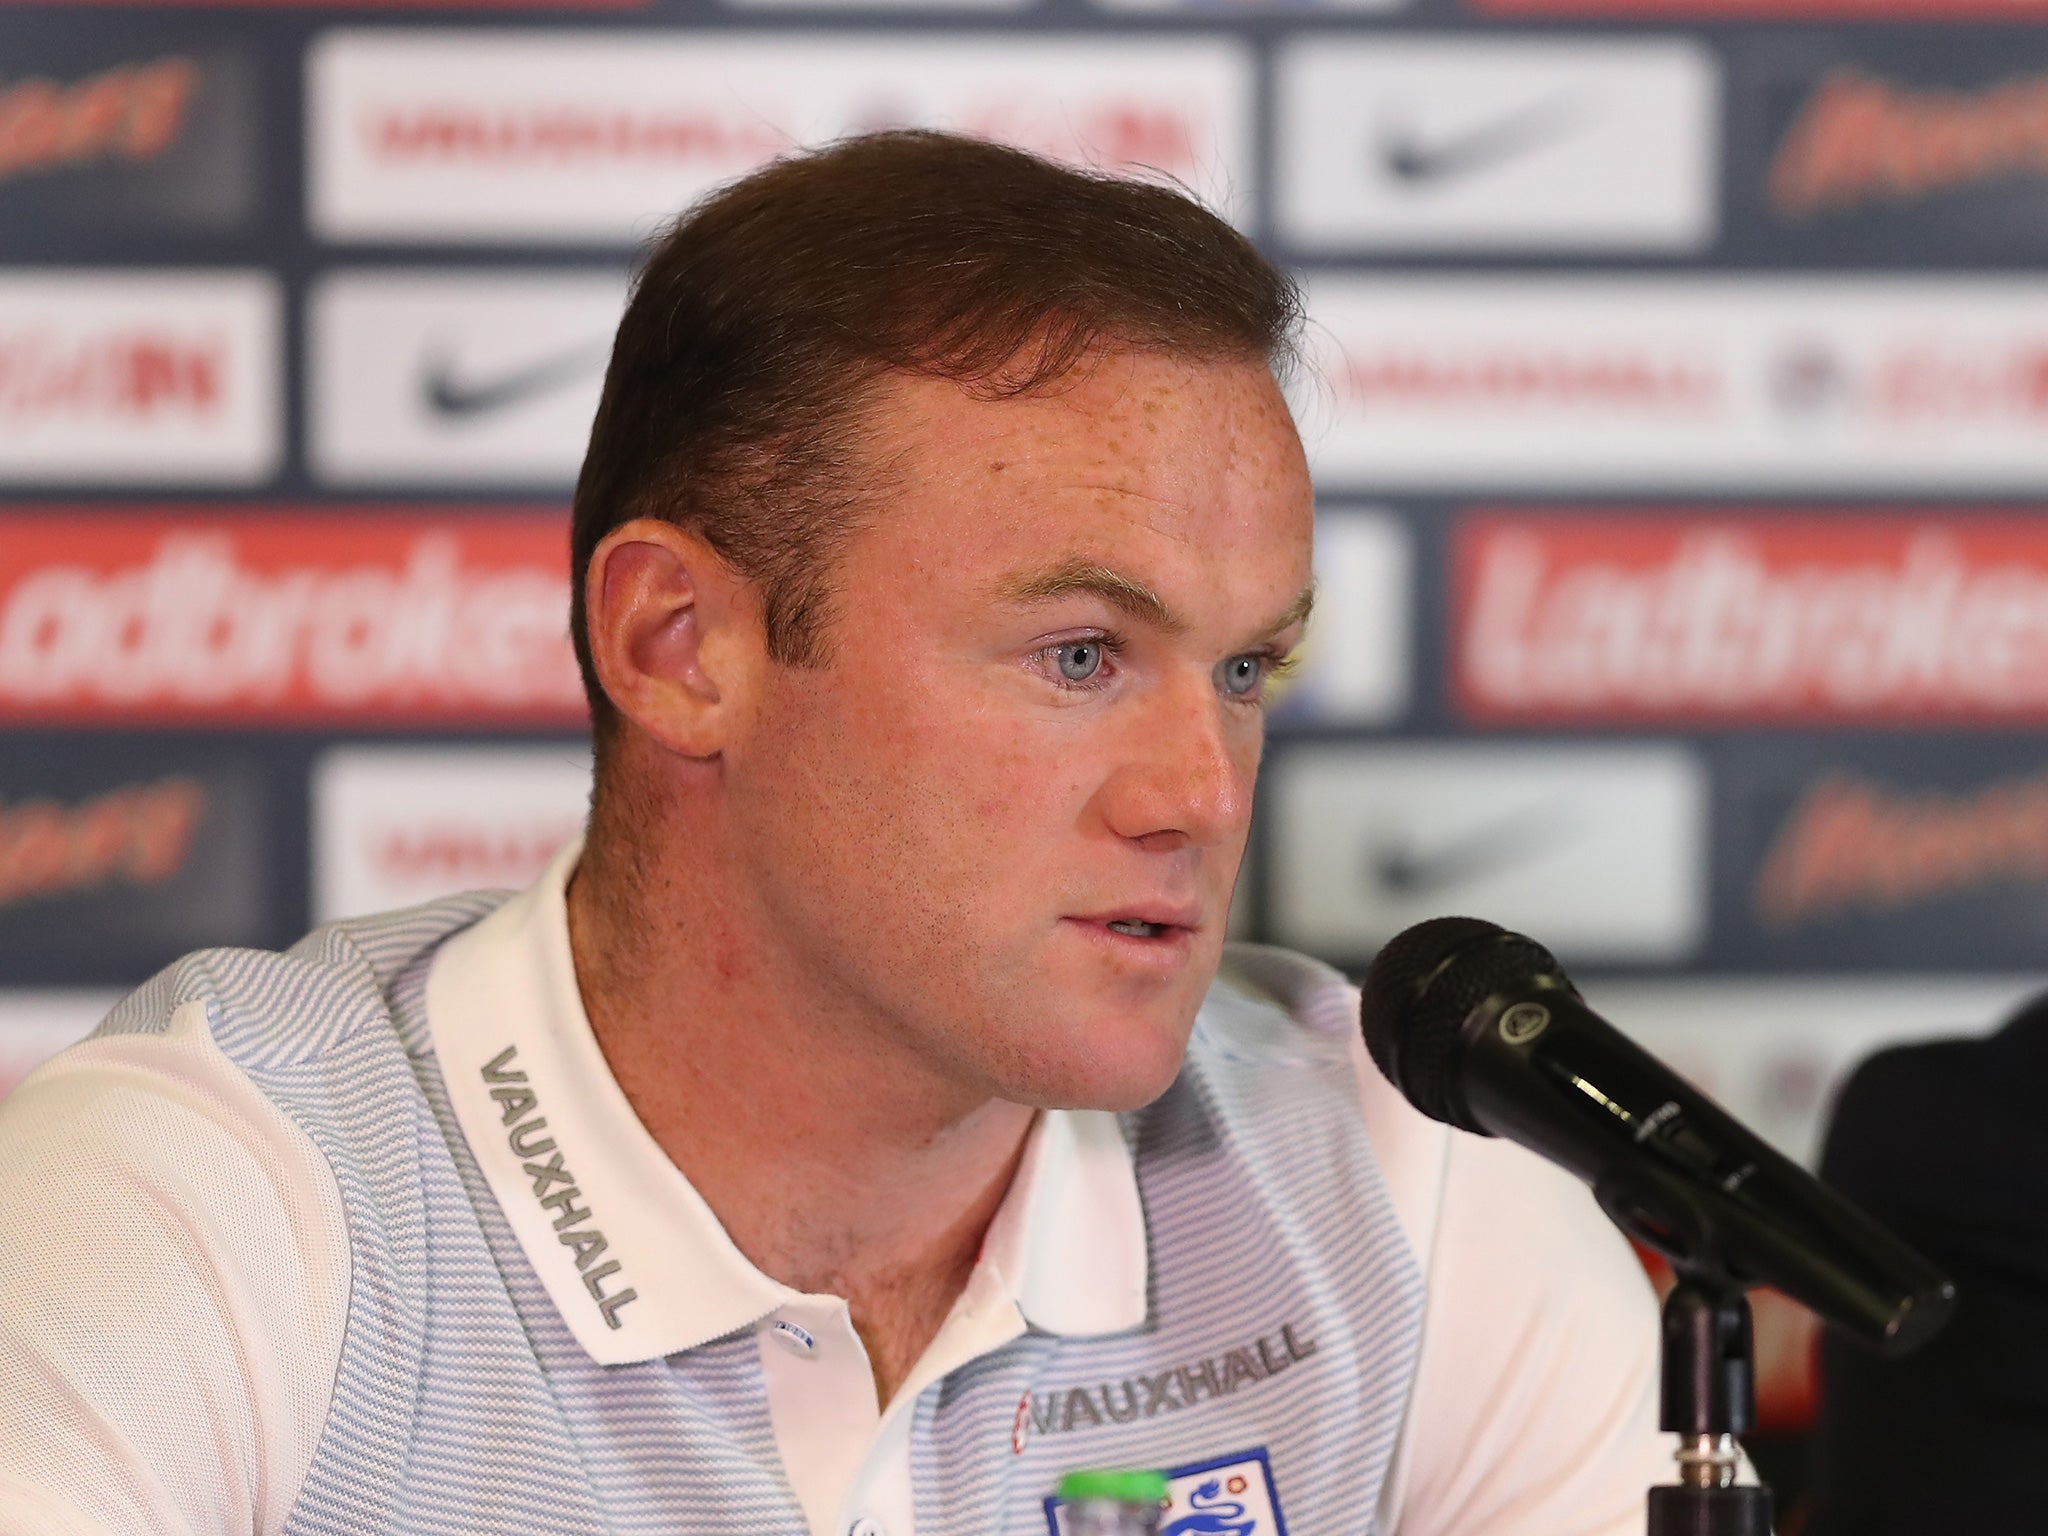 Rooney himself says his only regret is not winning a trophy with England